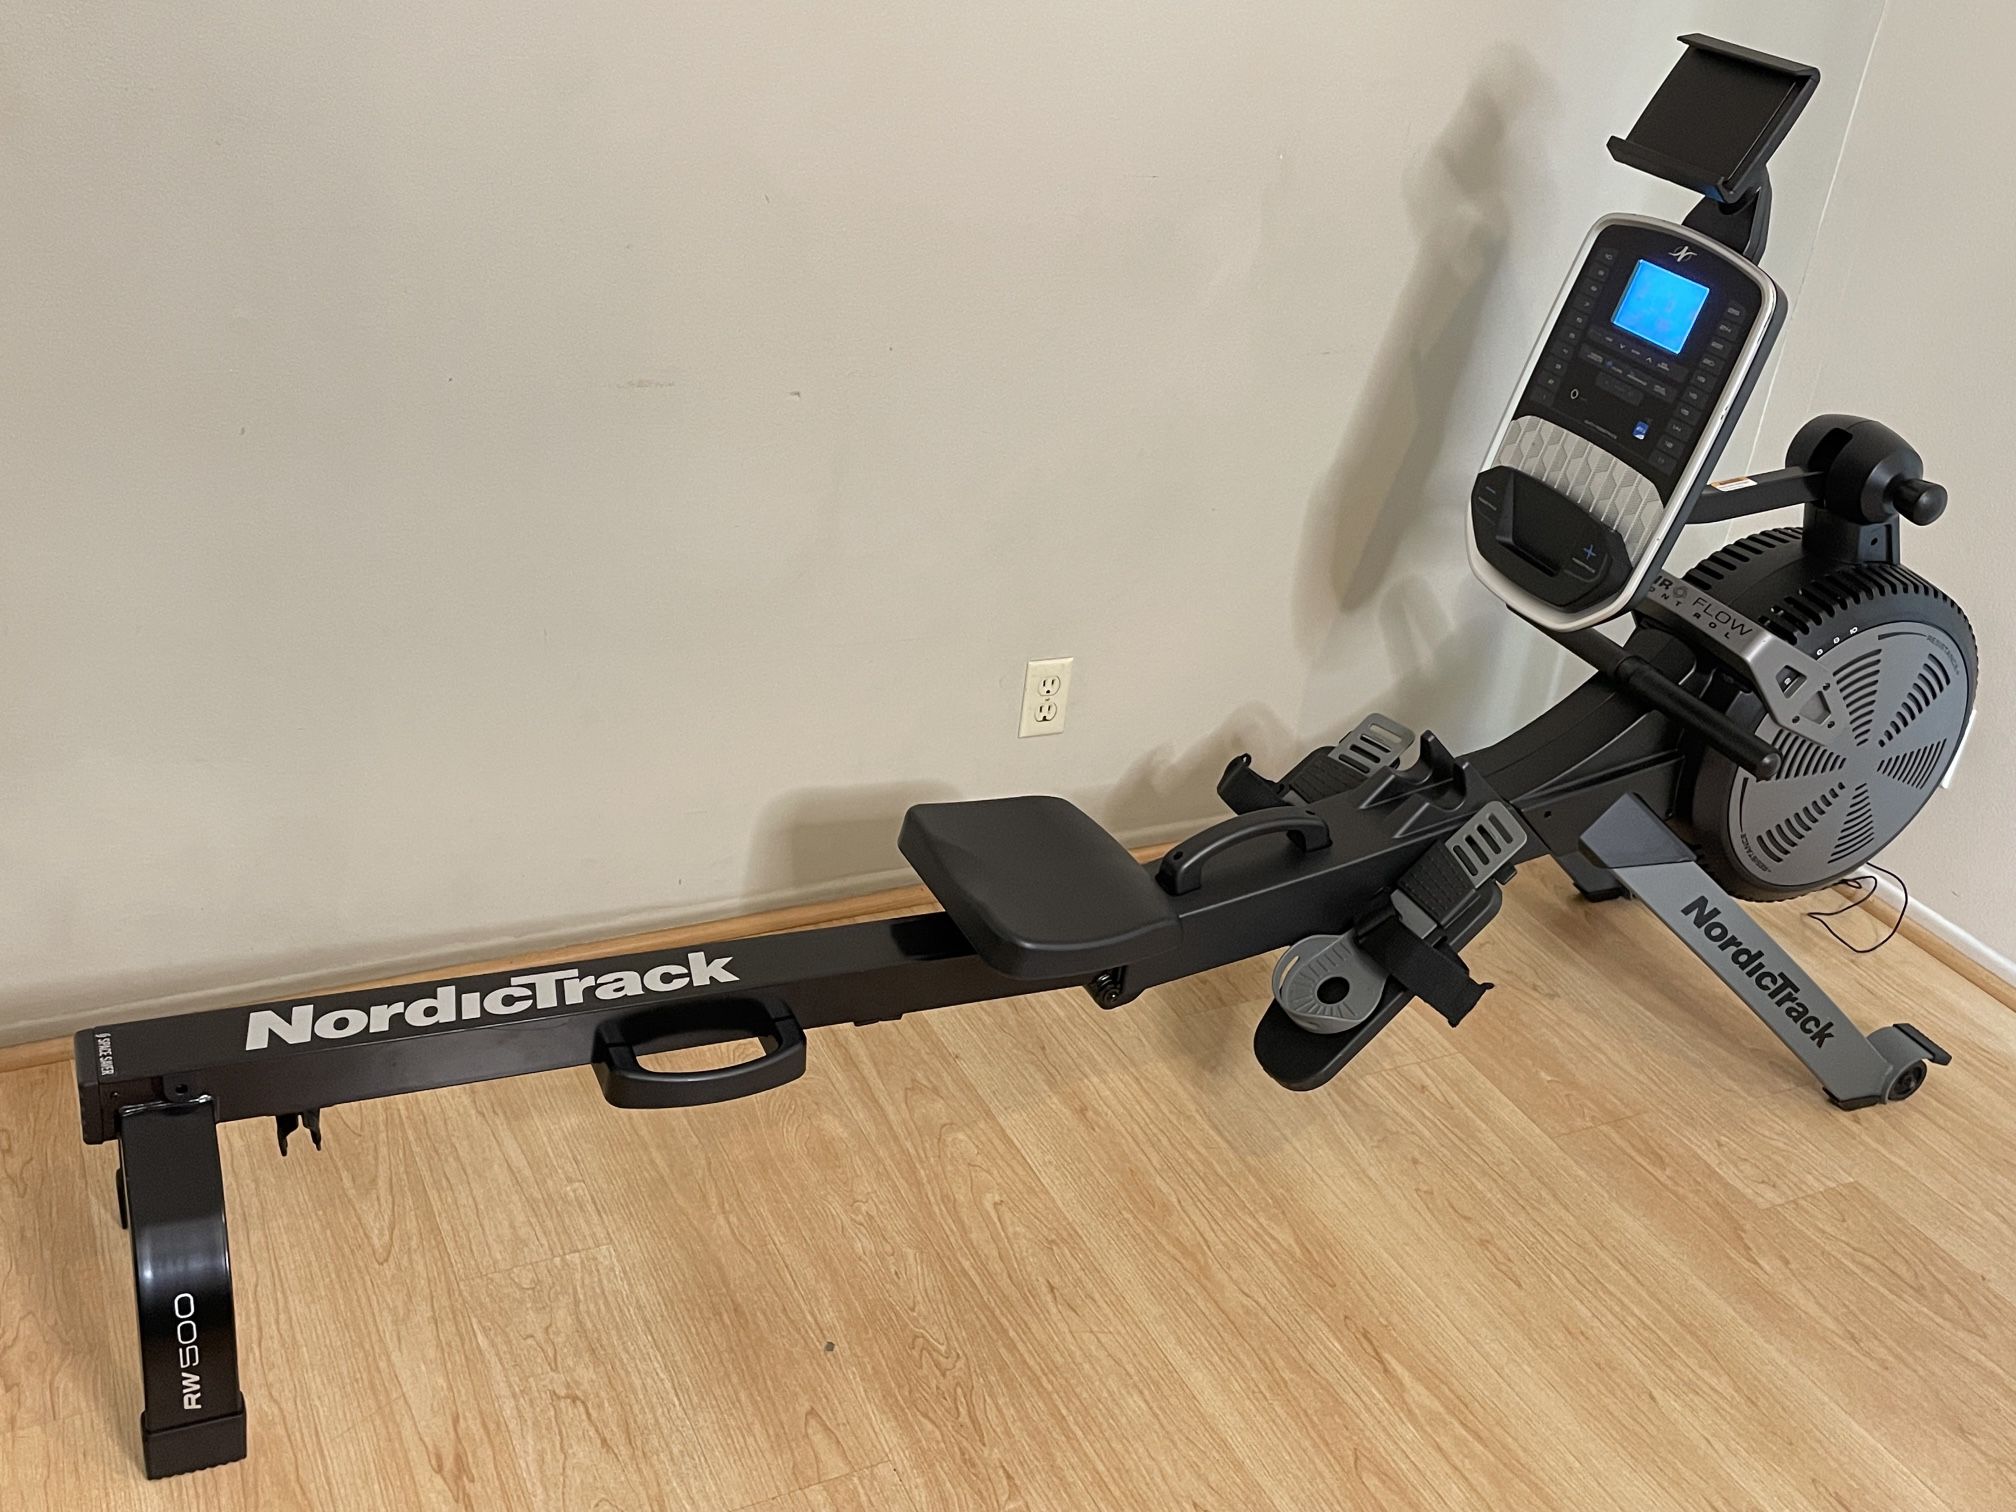 NordicTrack RW500 Rower Rowing Machine Exercise Total-Body Workout Air Resistance Crossfit Fitness